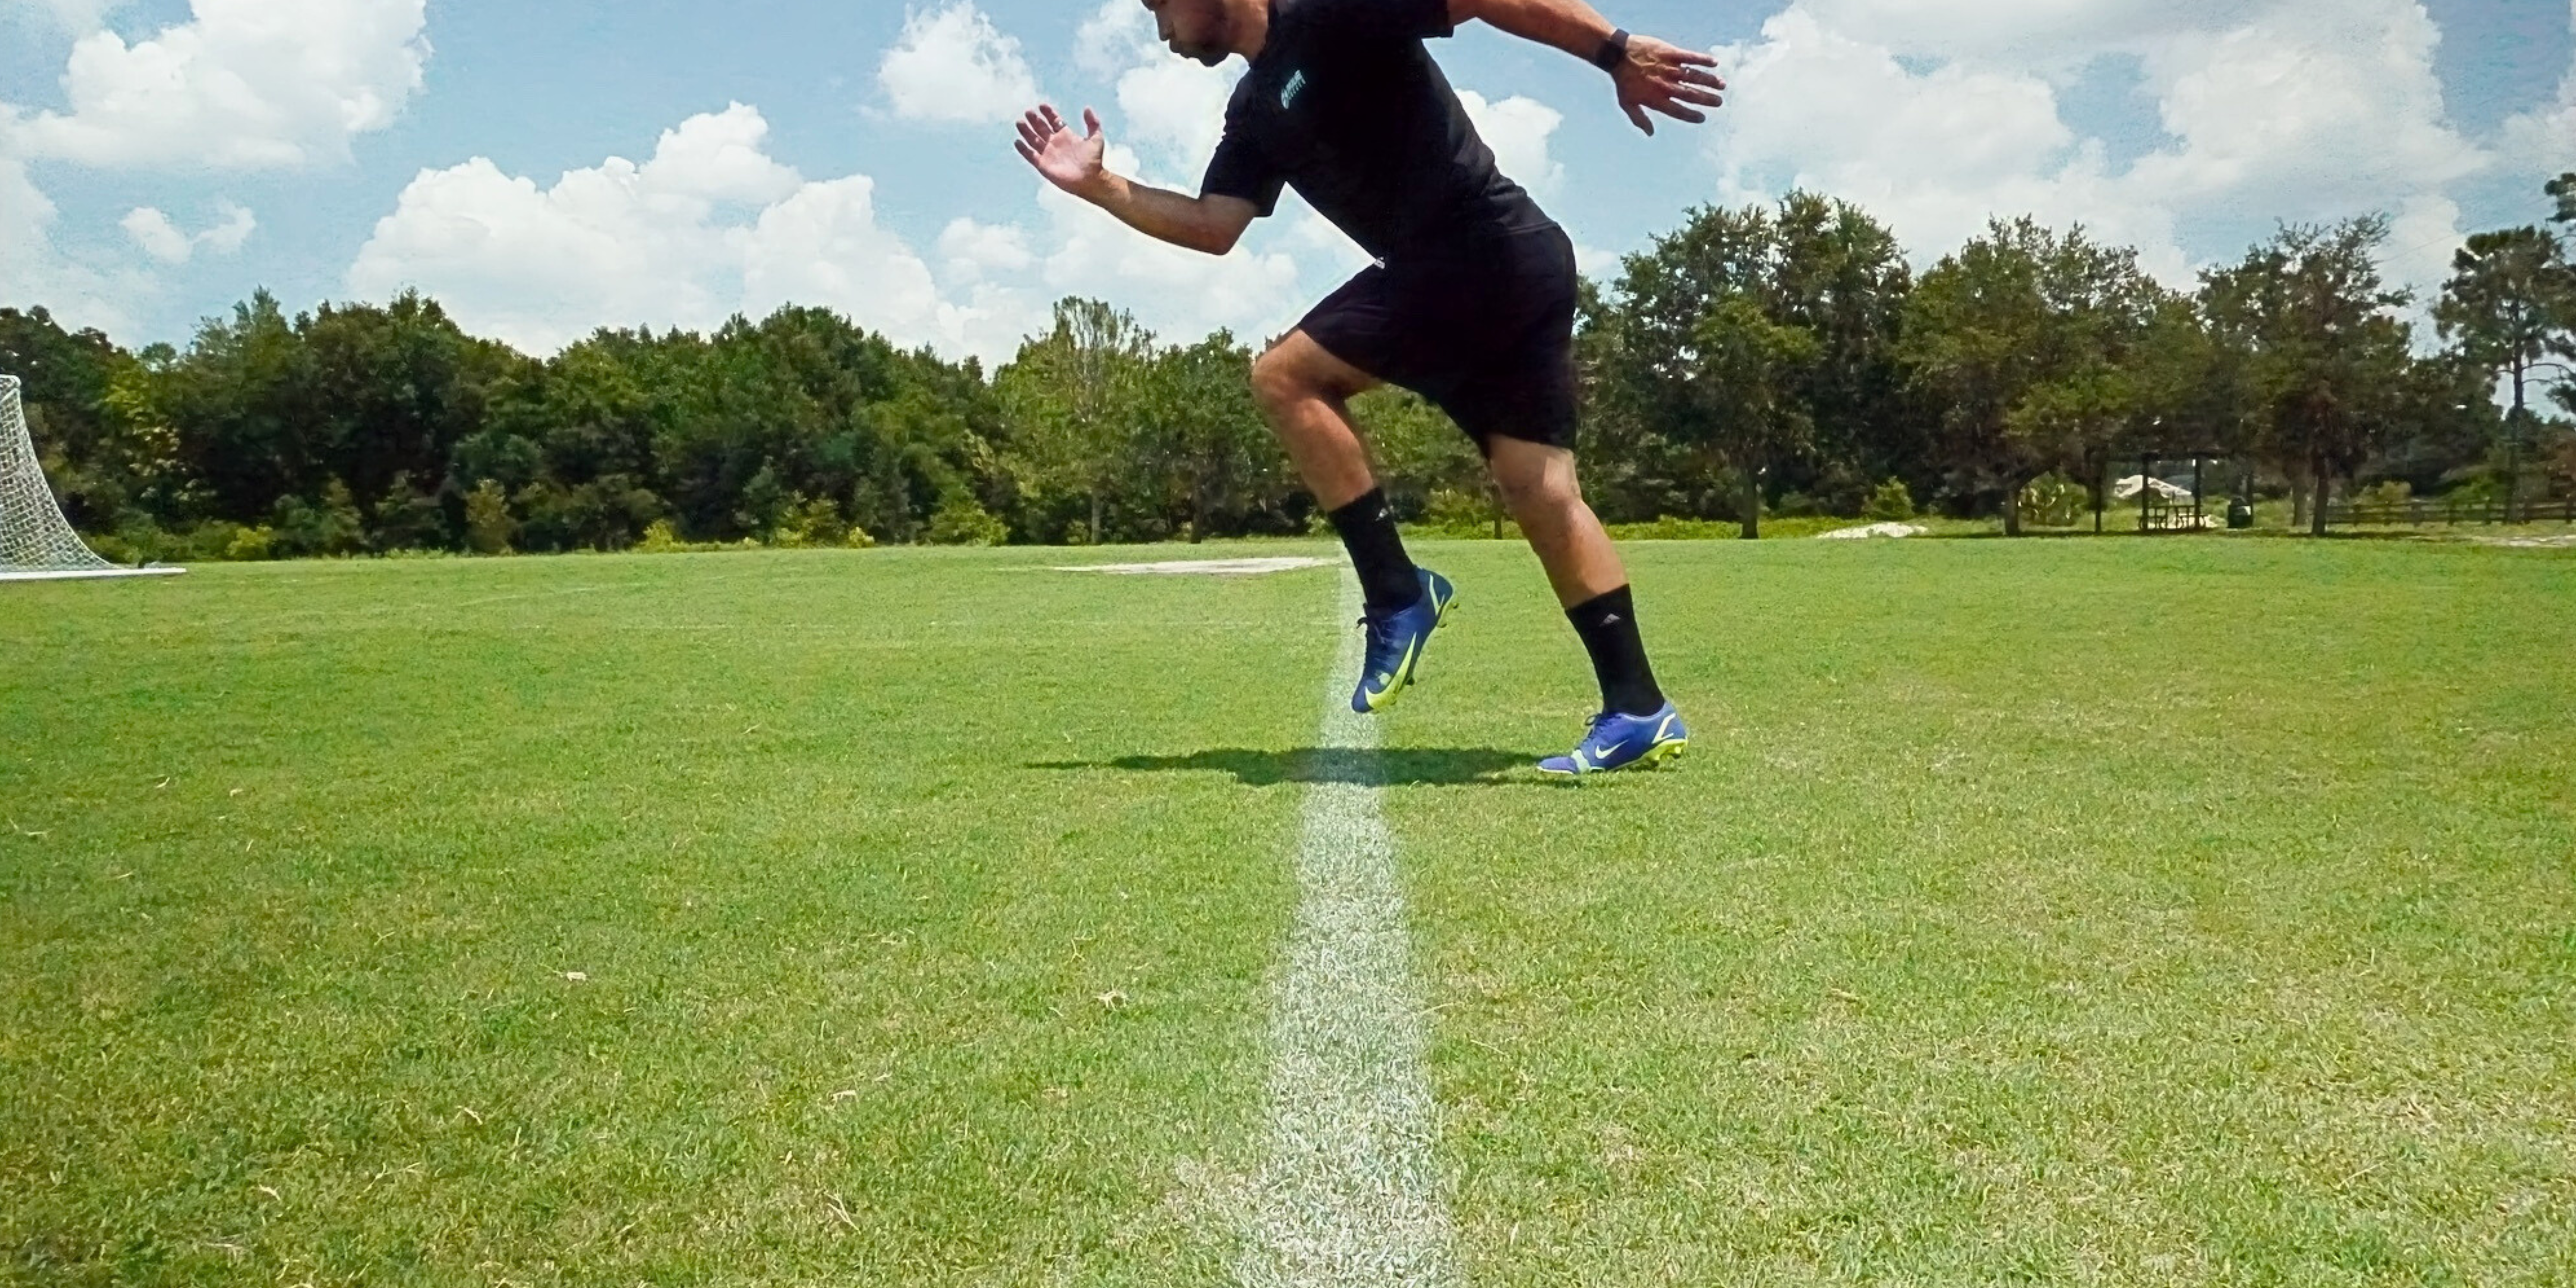 Elevate Your Soccer Fitness with These 3 Dynamic Drills